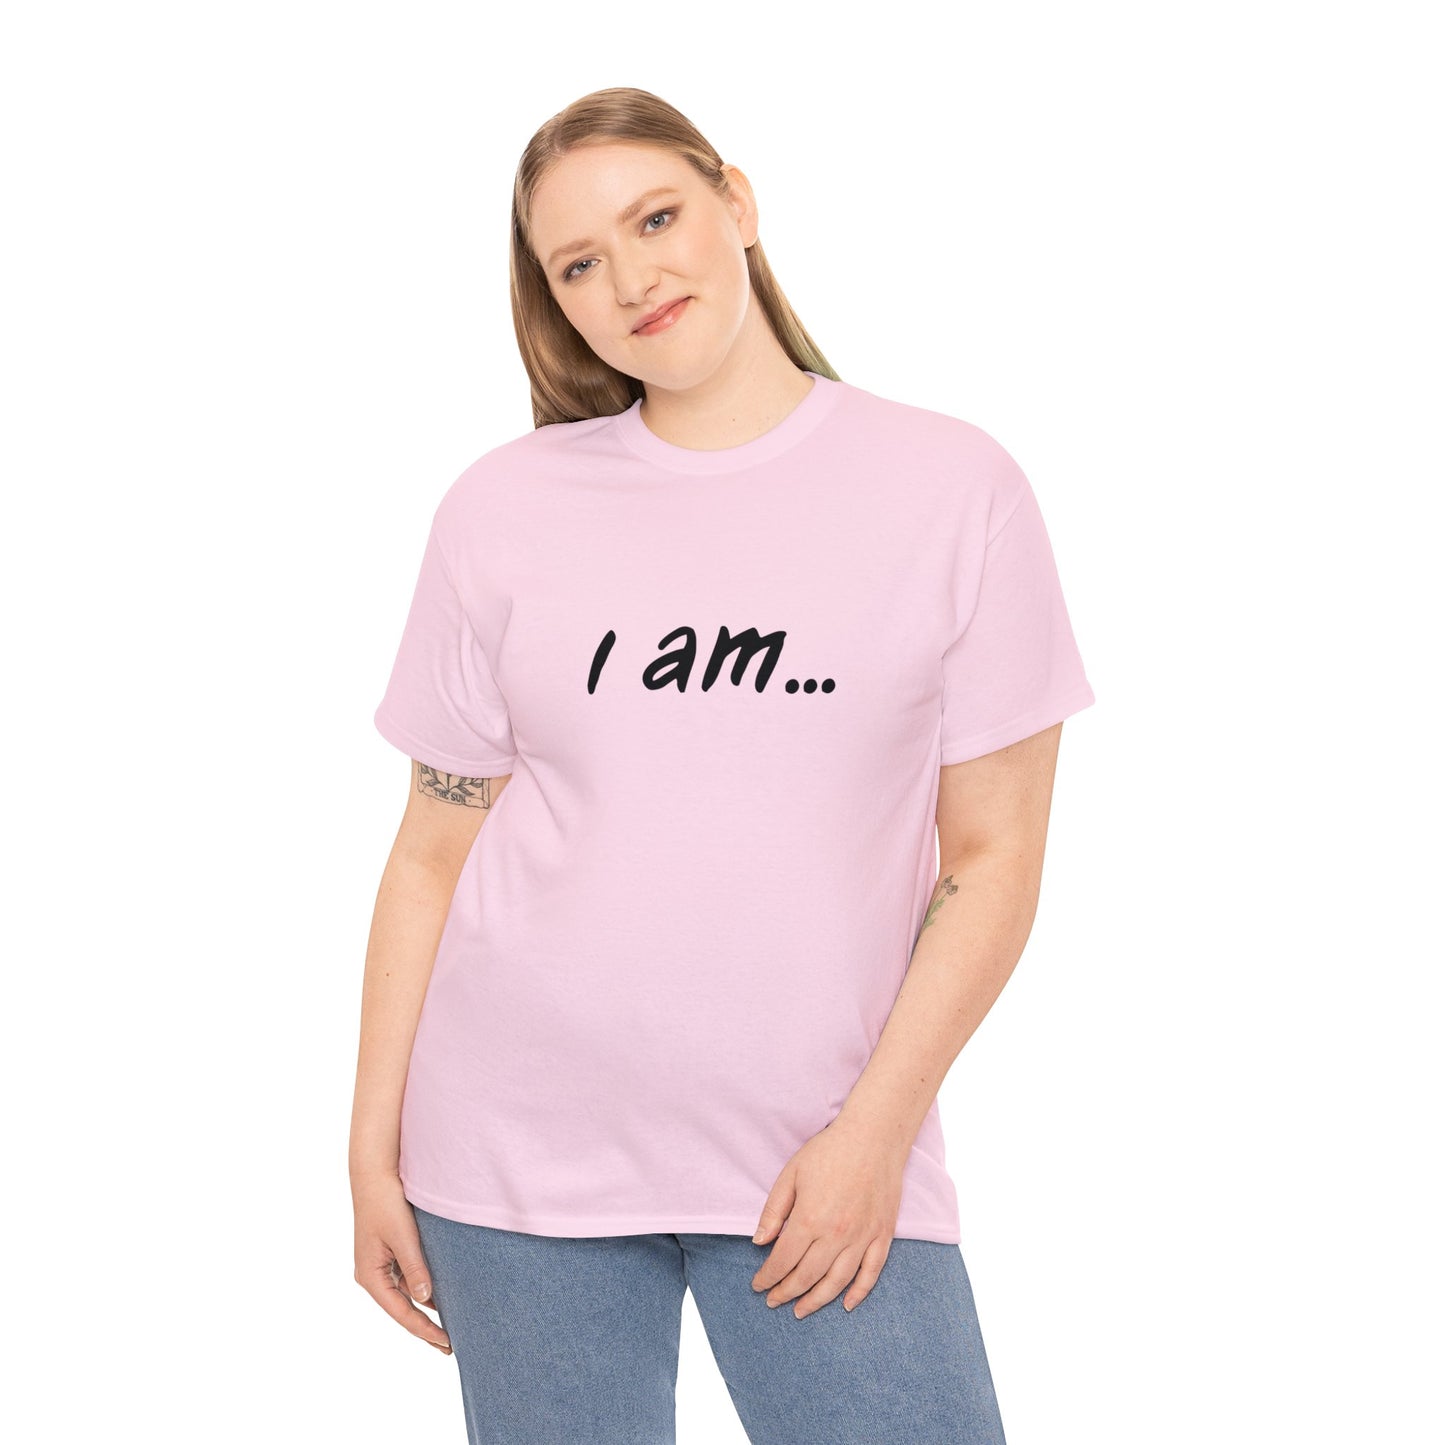 'I am...'autism aware' people